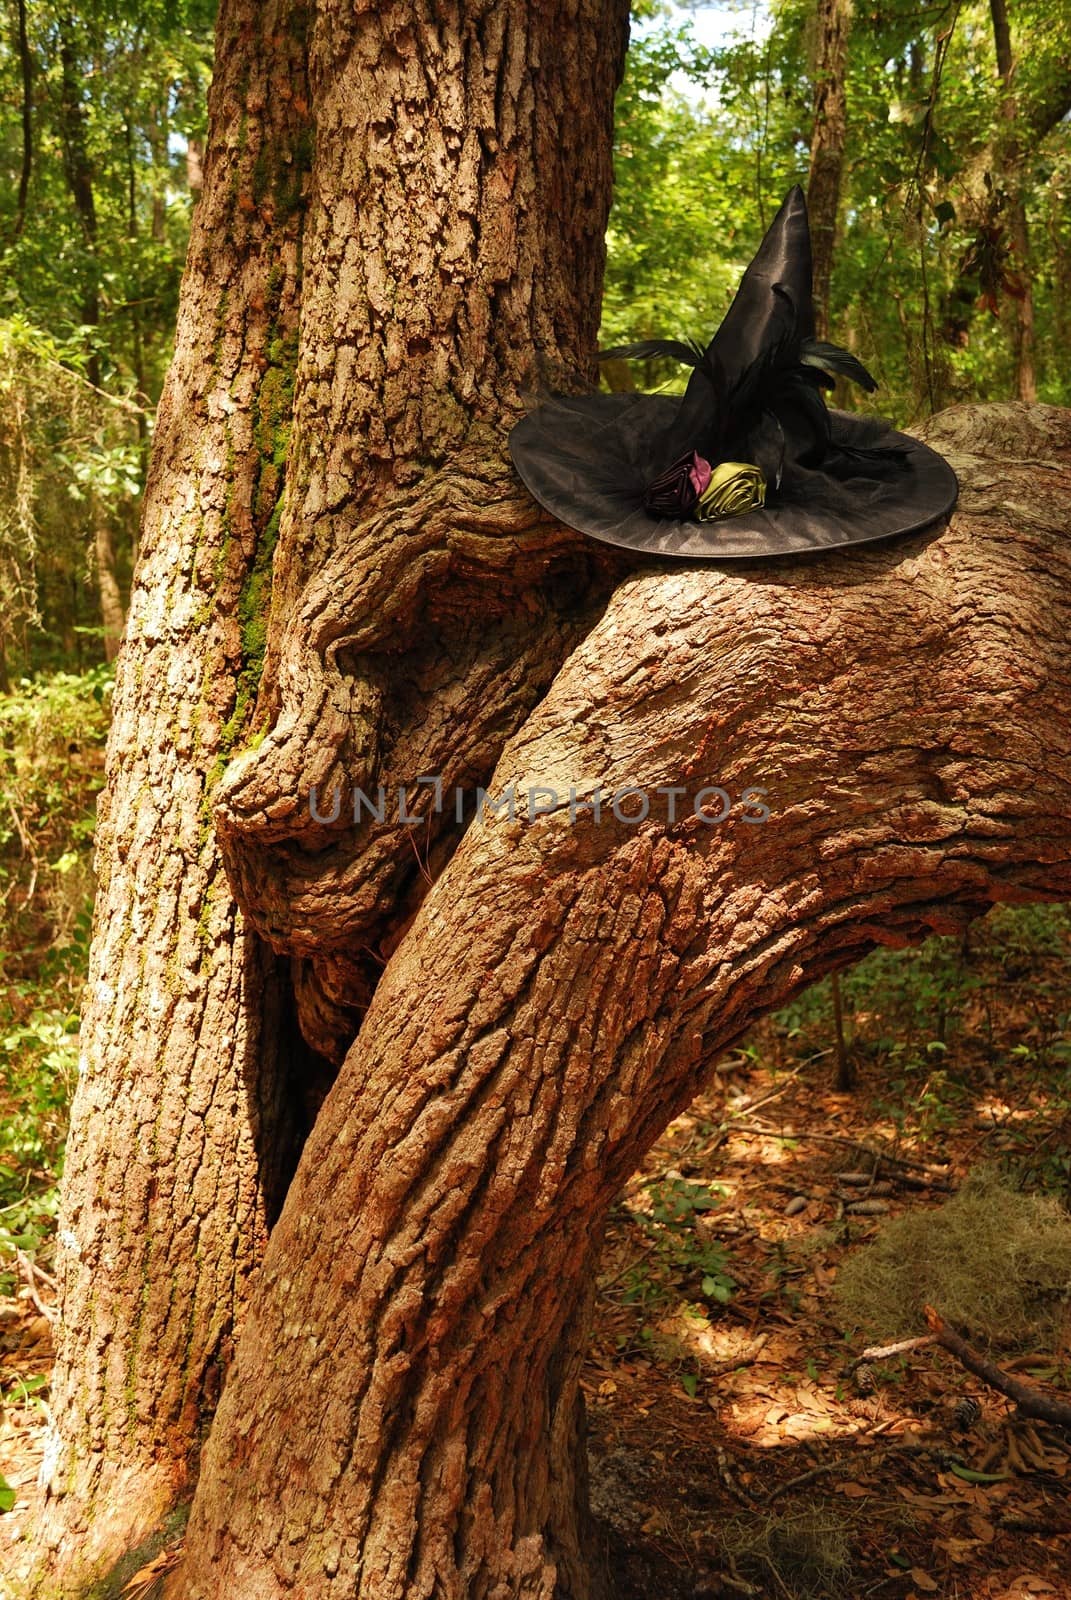 A black witch hat sits in the crook of a tree in the forest